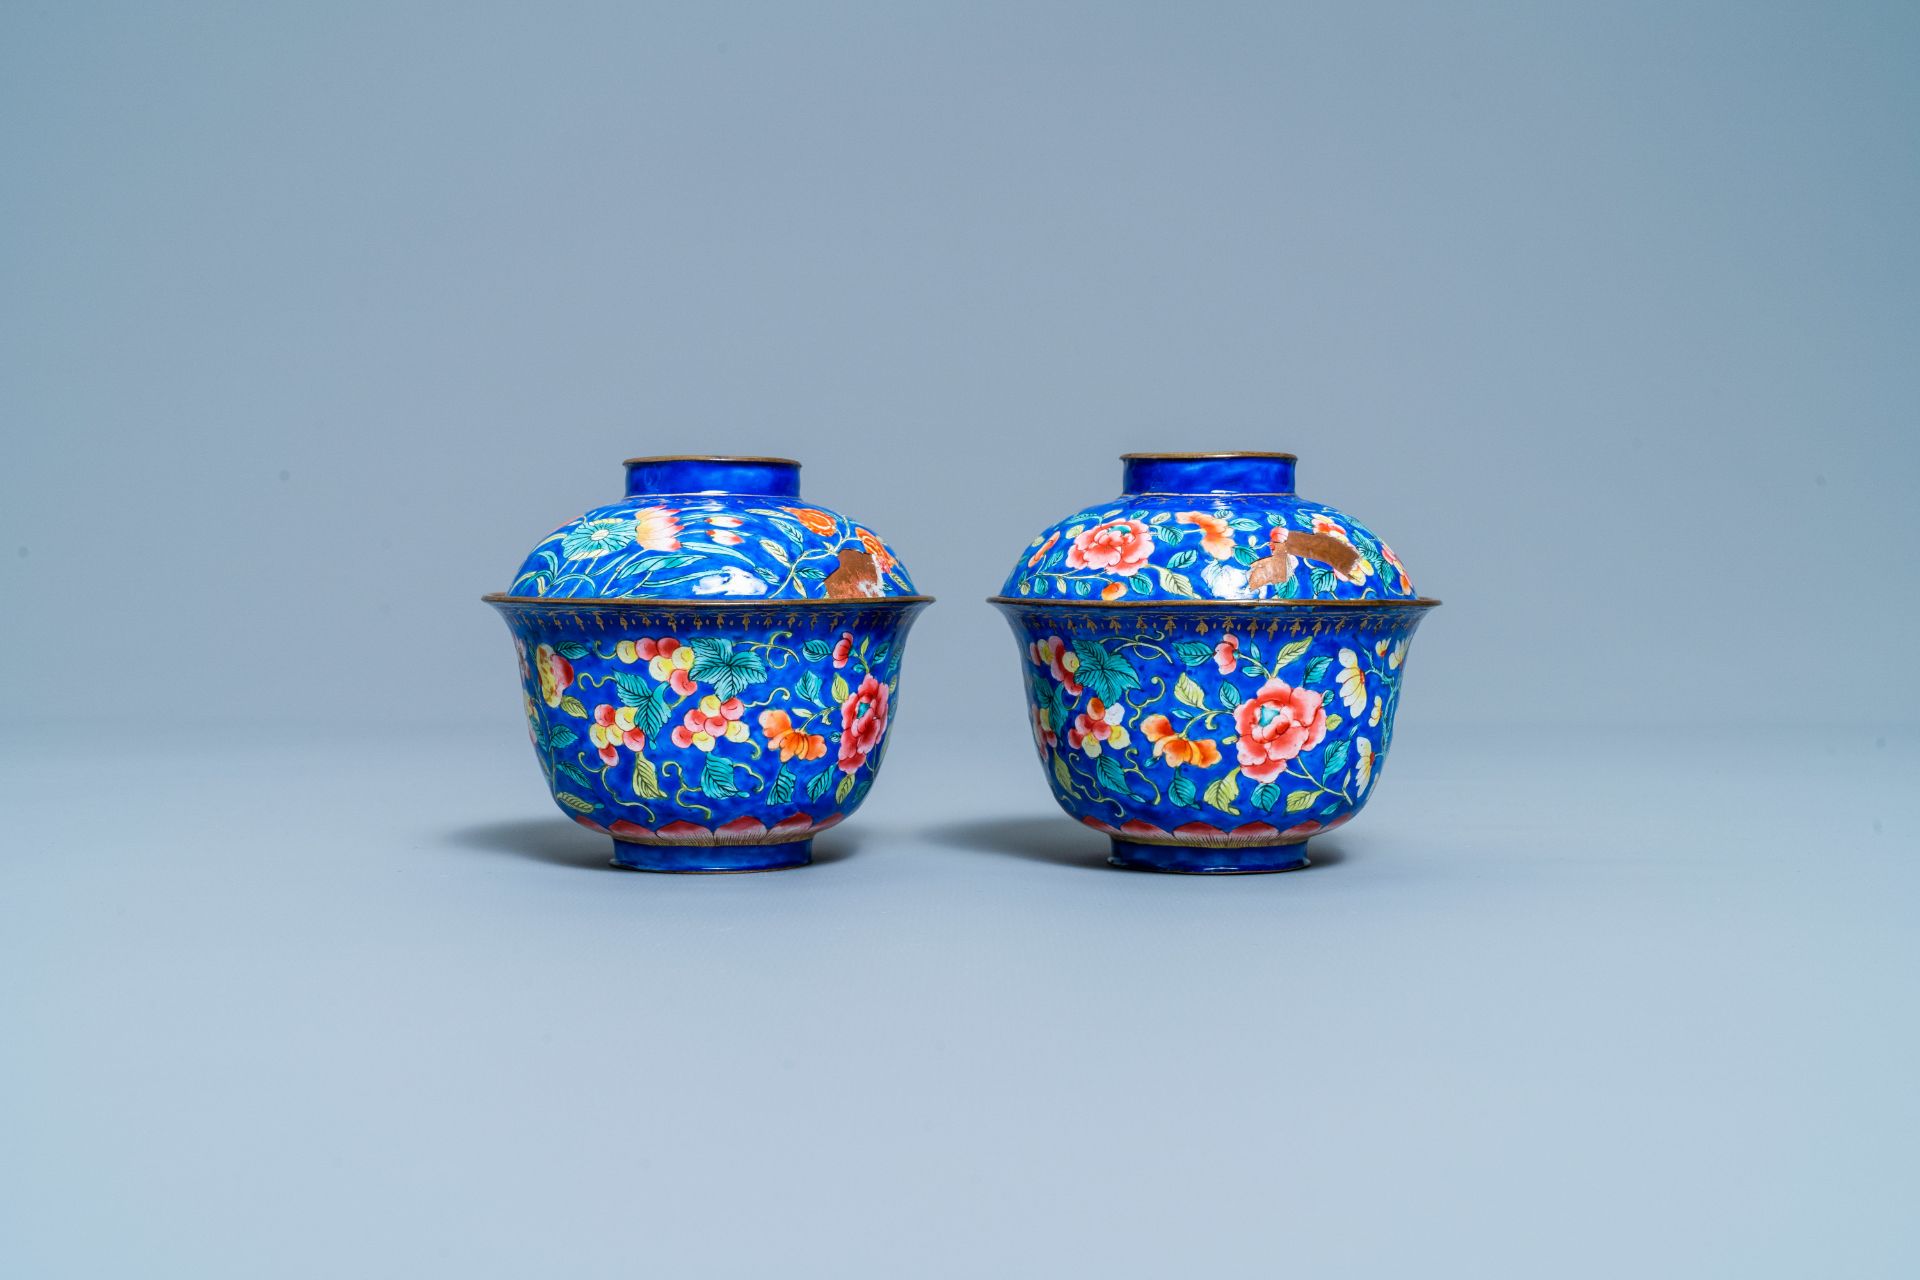 A pair of Vietnamese Phap Lam Hue enamel covered bowls on stands, 18/19th C. - Image 4 of 10